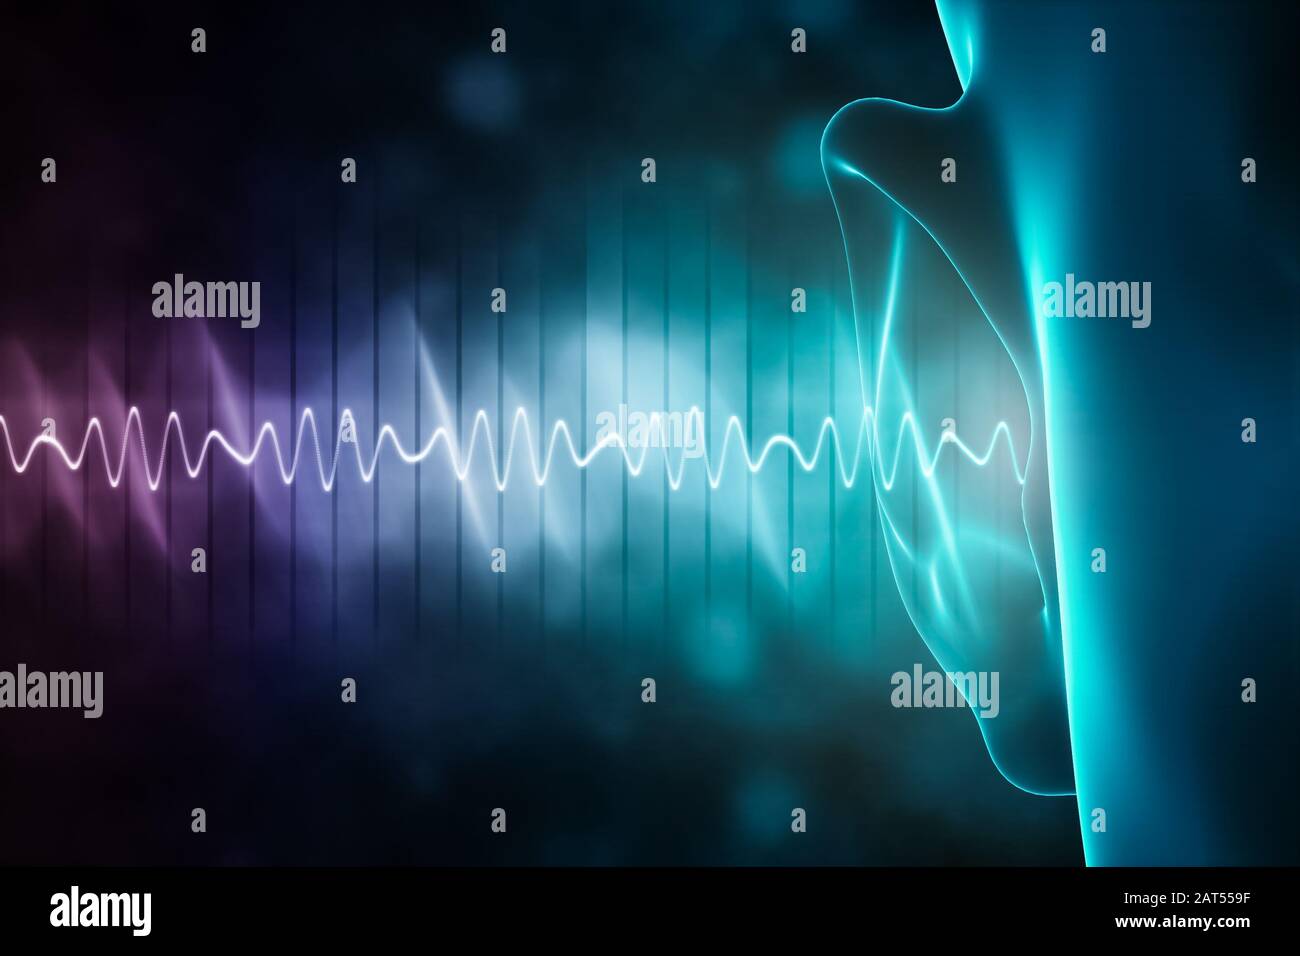 soundwave and equalizer bars with human ear. 3d rendering illustration with copy space. Sense of hearing, sound and music graphic concepts. Stock Photo